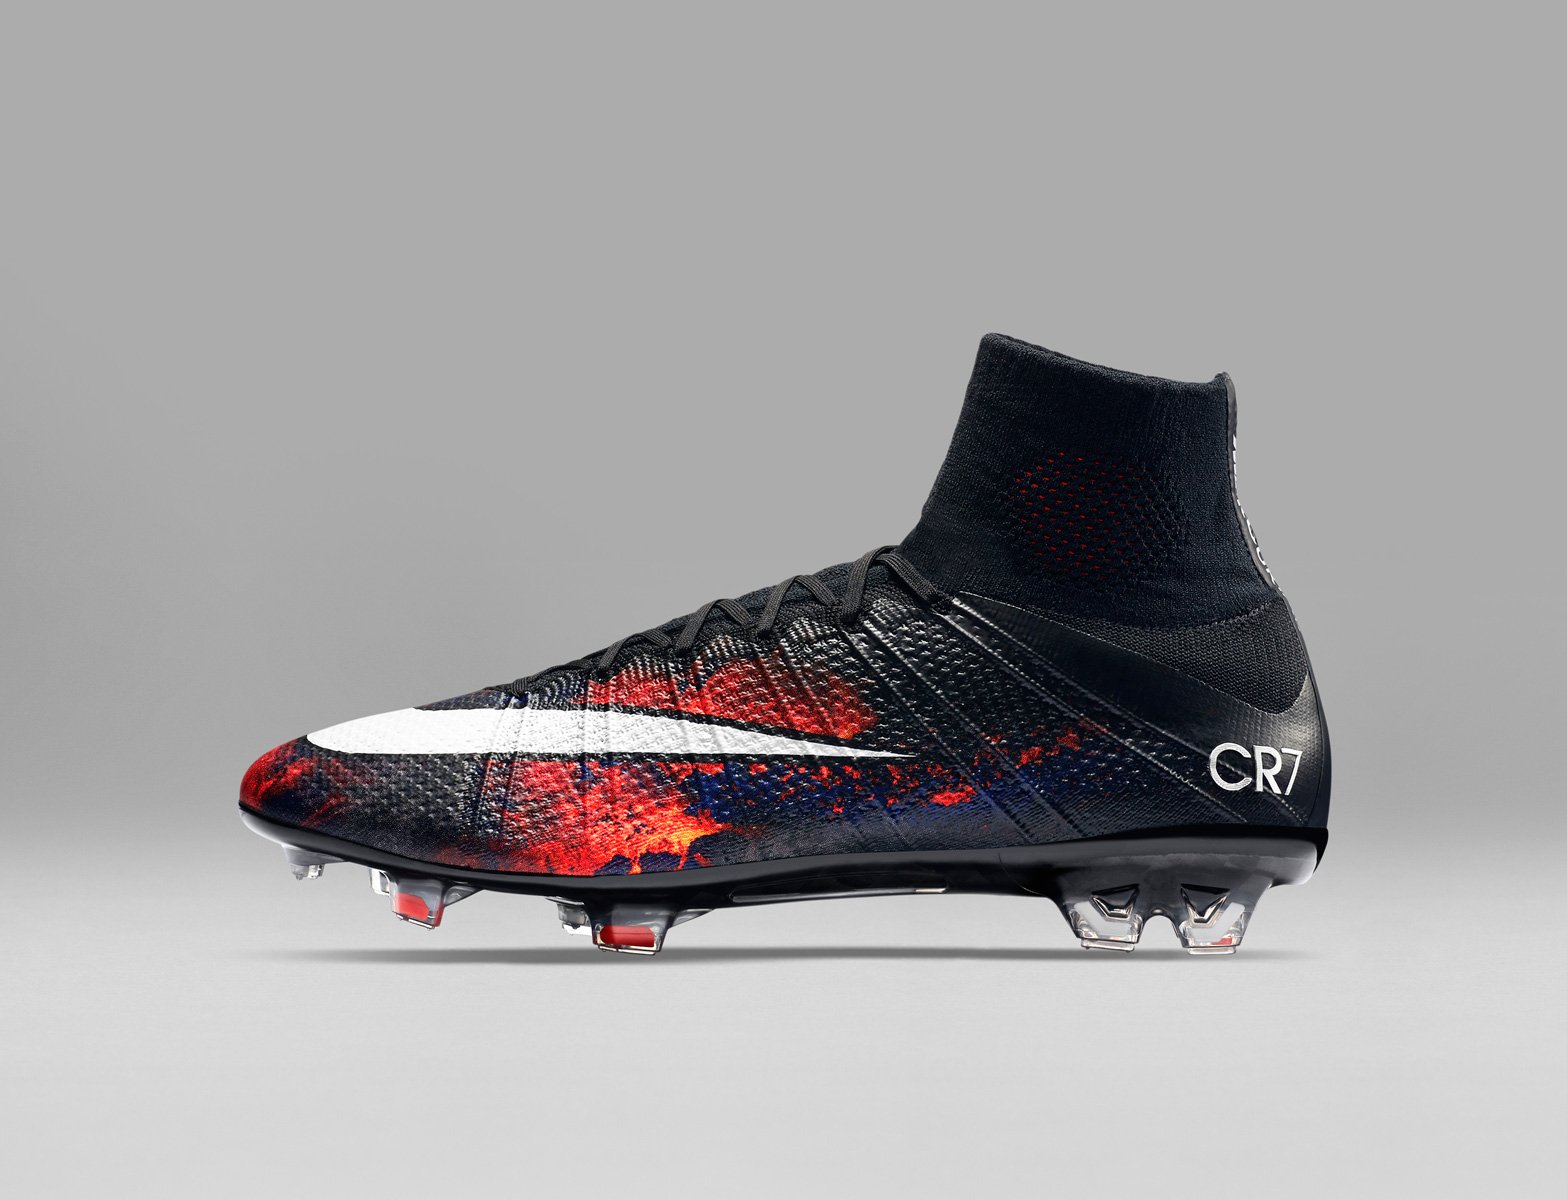 Ejército libro de bolsillo Asociación JD Football on Twitter: "The @Cristiano @NikeUK Mercurial Superfly CR7  Chapter 1: Savage Beauty is coming soon to https://t.co/WnLWiW9DmZ  https://t.co/9yAojATXPb" / Twitter